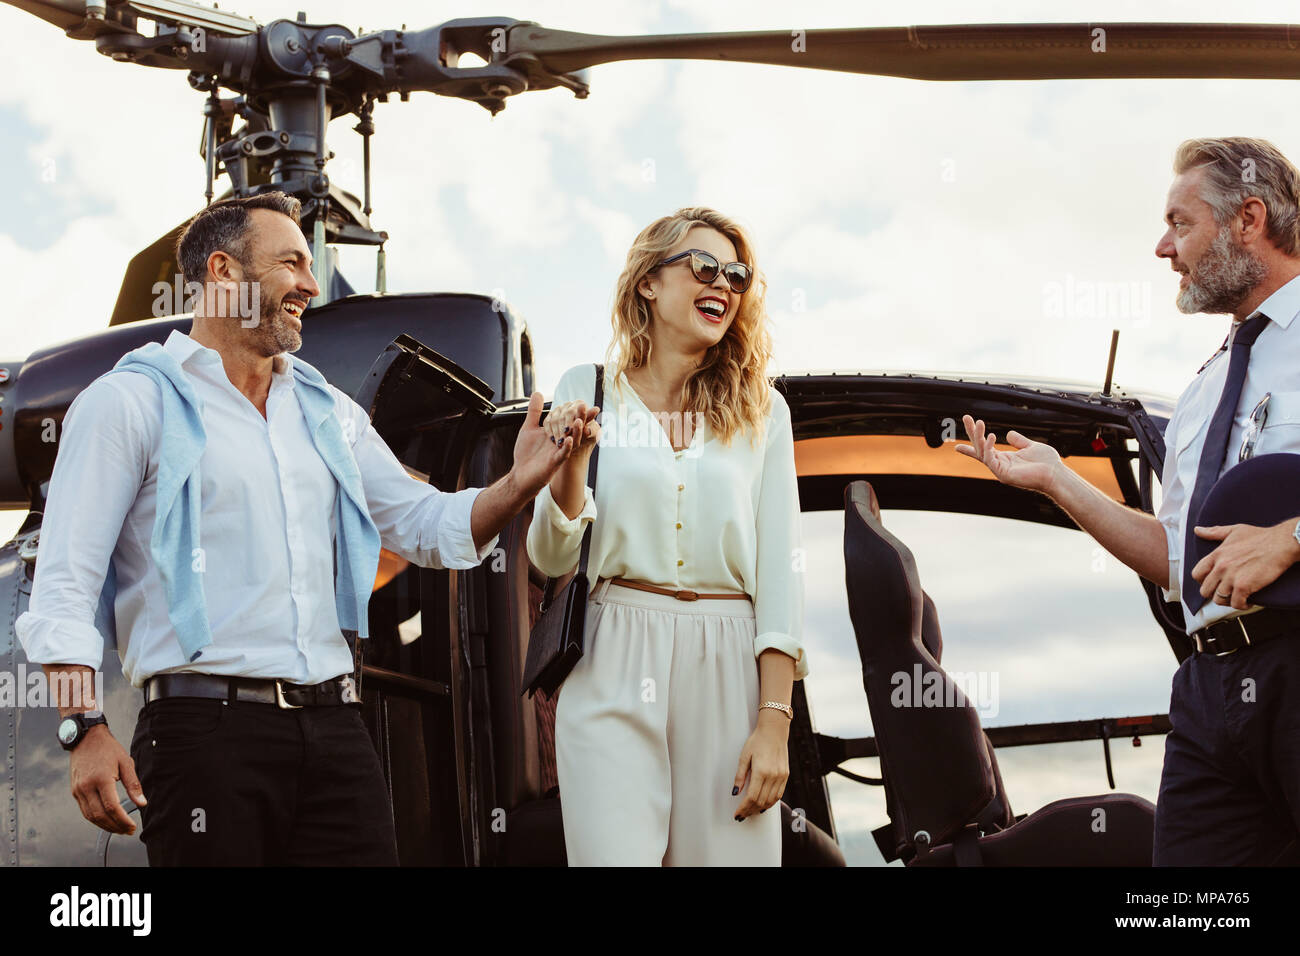 Smiling man and woman alighted from a private helicopter with pilot standing by. Couple getting off a private aircraft with mature pilot. Stock Photo